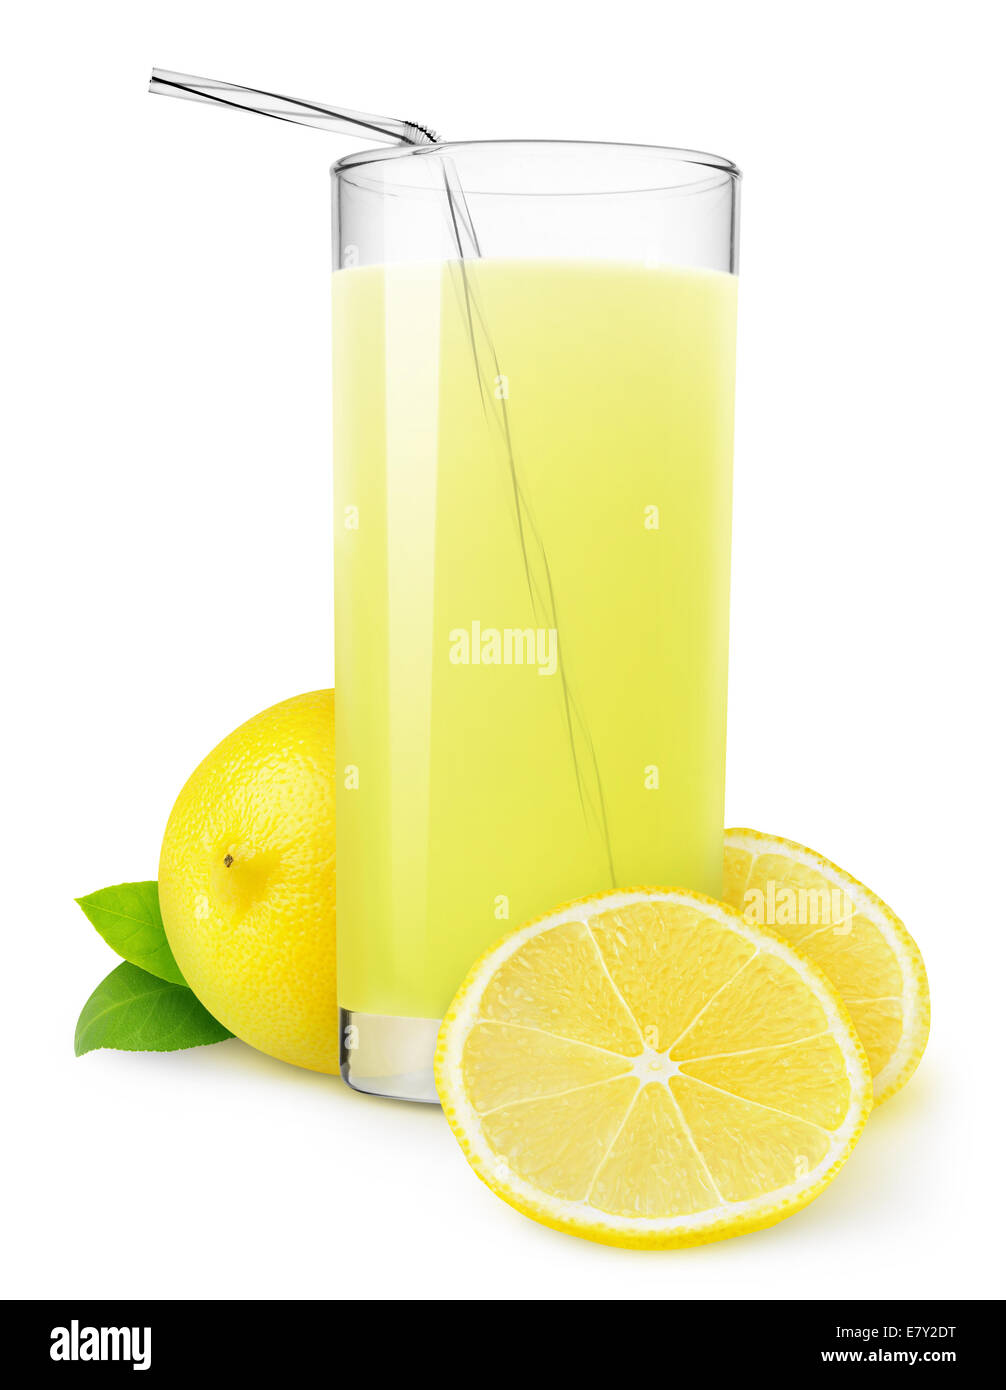 Verre de limonade isolated on white Banque D'Images